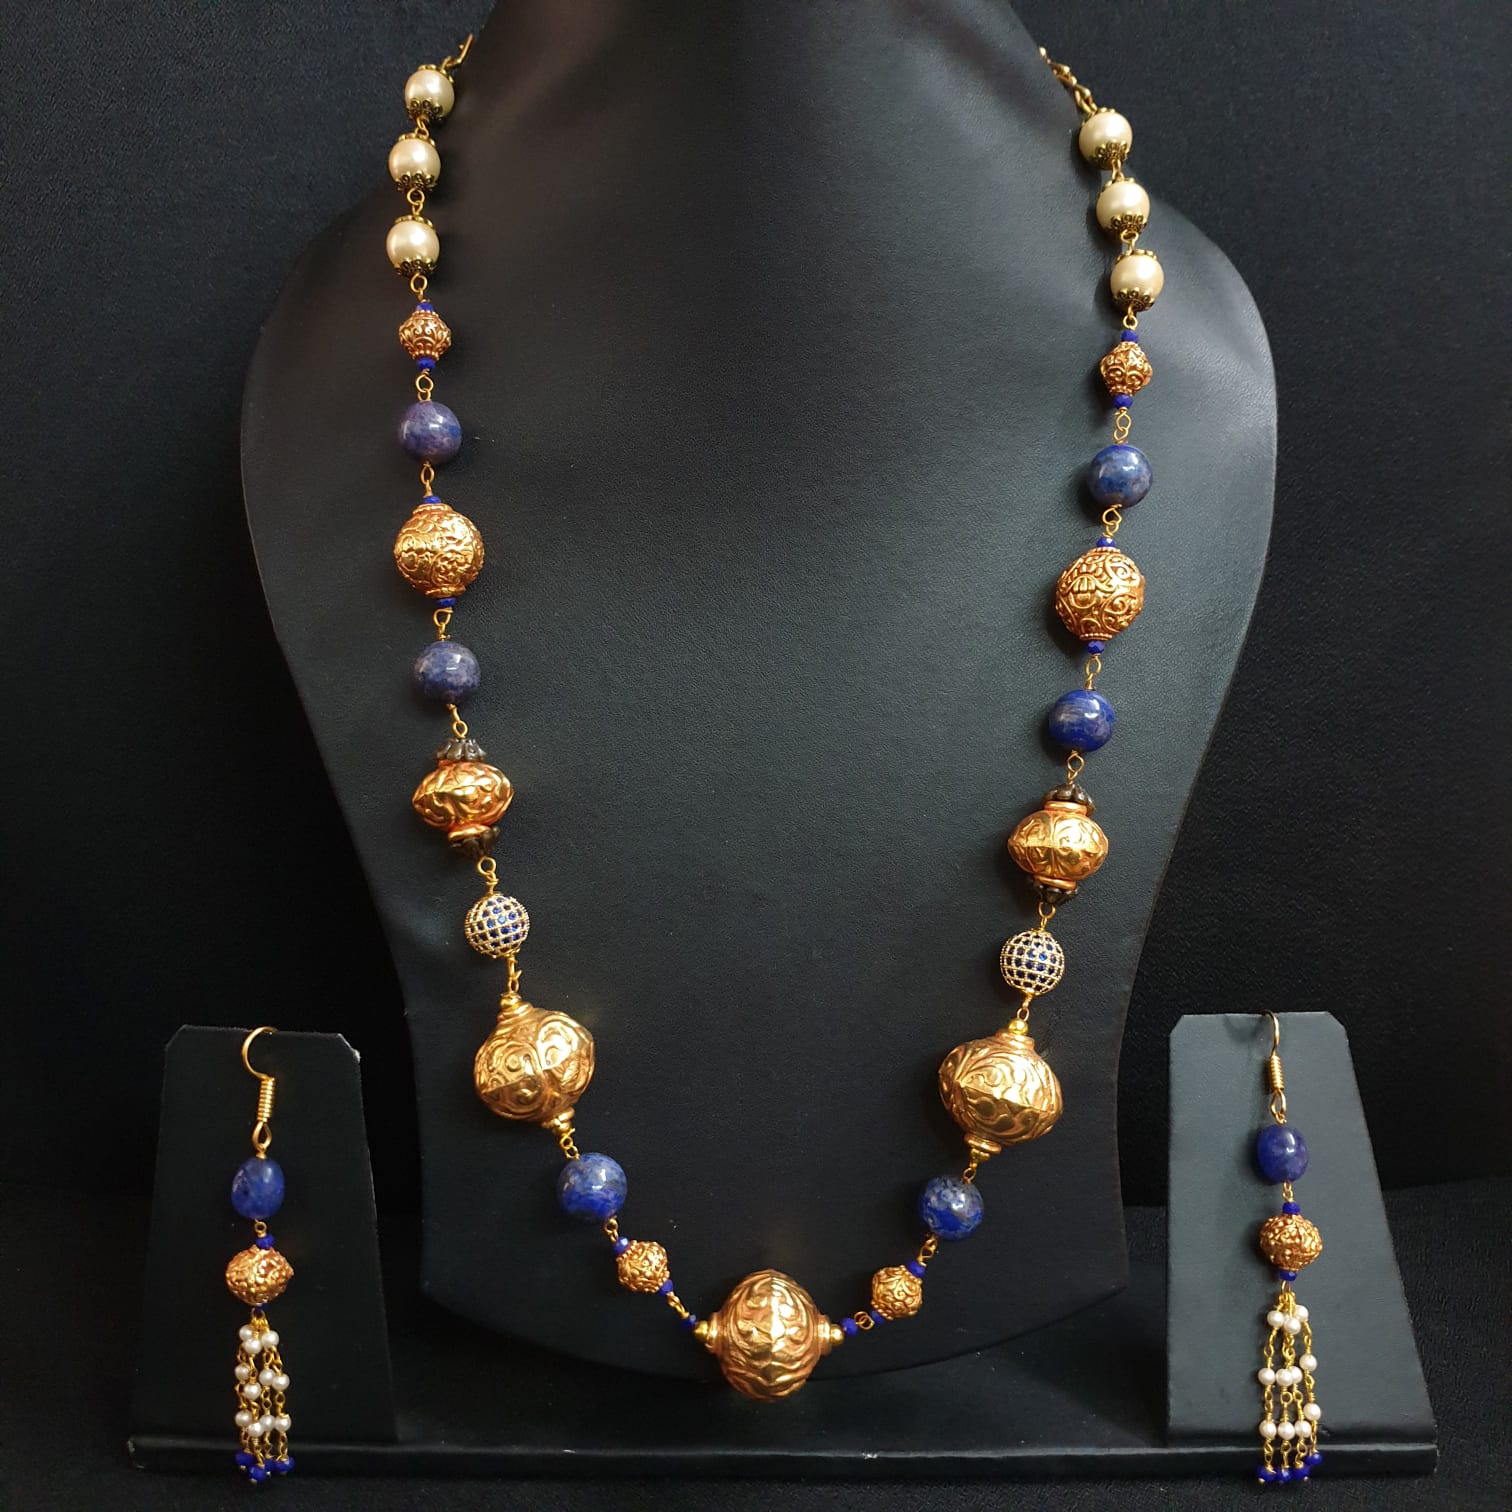 Antique Beads Blue Stone Necklace With Earrings